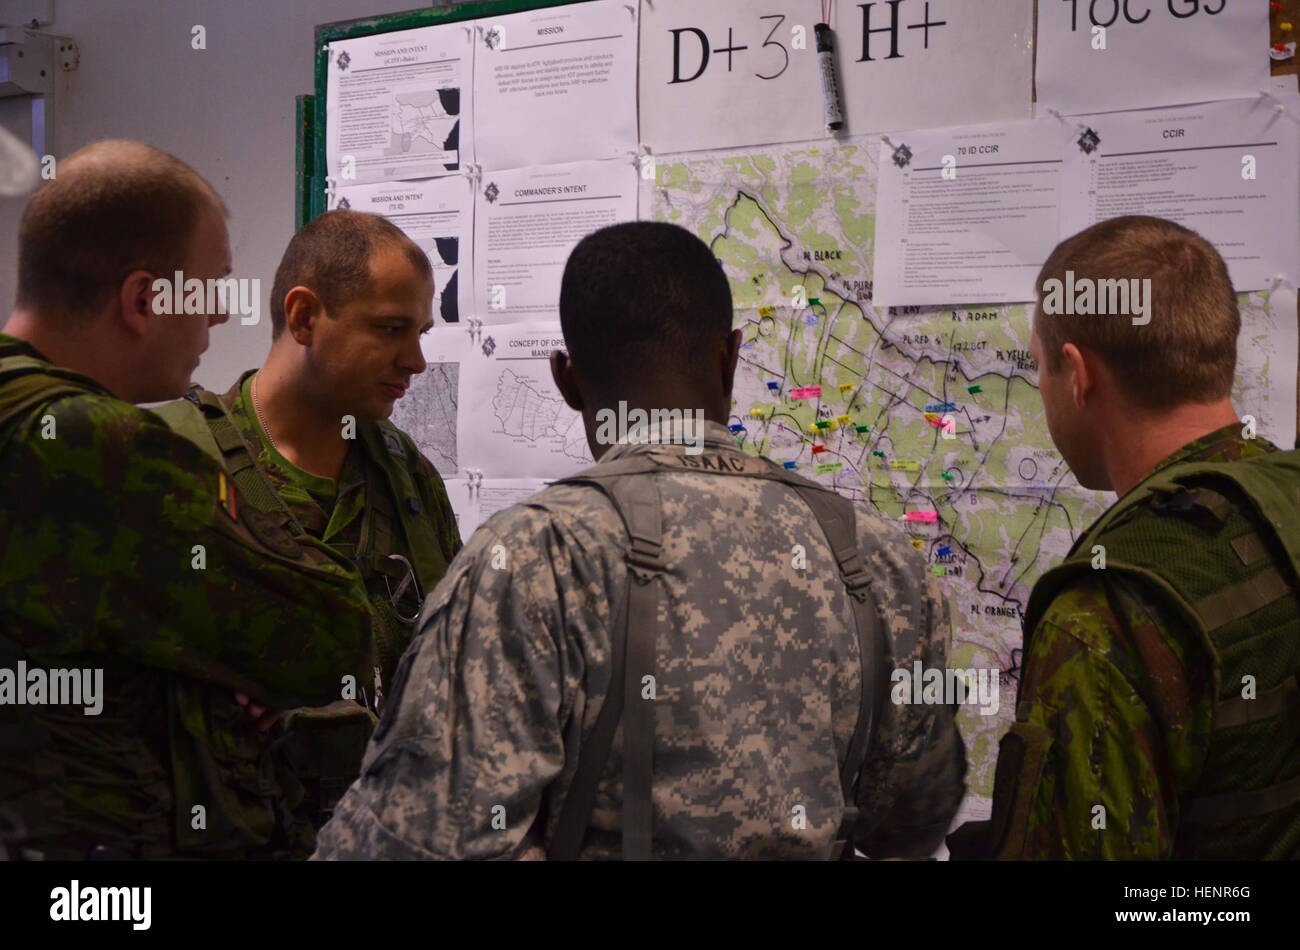 Lithuanian Land Force Capt. Darius Zukas of 'Iron Wolf' Mechanized Infantry Brigade reviews map locations during training exercise Saber Junction 2014 at the Joint Multinational Readiness Center in Hohenfels, Germany, Sept. 2, 2014. Saber Junction 2014 prepares U.S., NATO allies, and European security partners to conduct unified land operations through the simultaneous combination of offensive, defensive, and stability operations appropriate to the mission and the environment. More information about Saber Junction 2014 can be found at http://www.eur.army.mil/SaberJunction/. (U.S. Army photo by Stock Photo